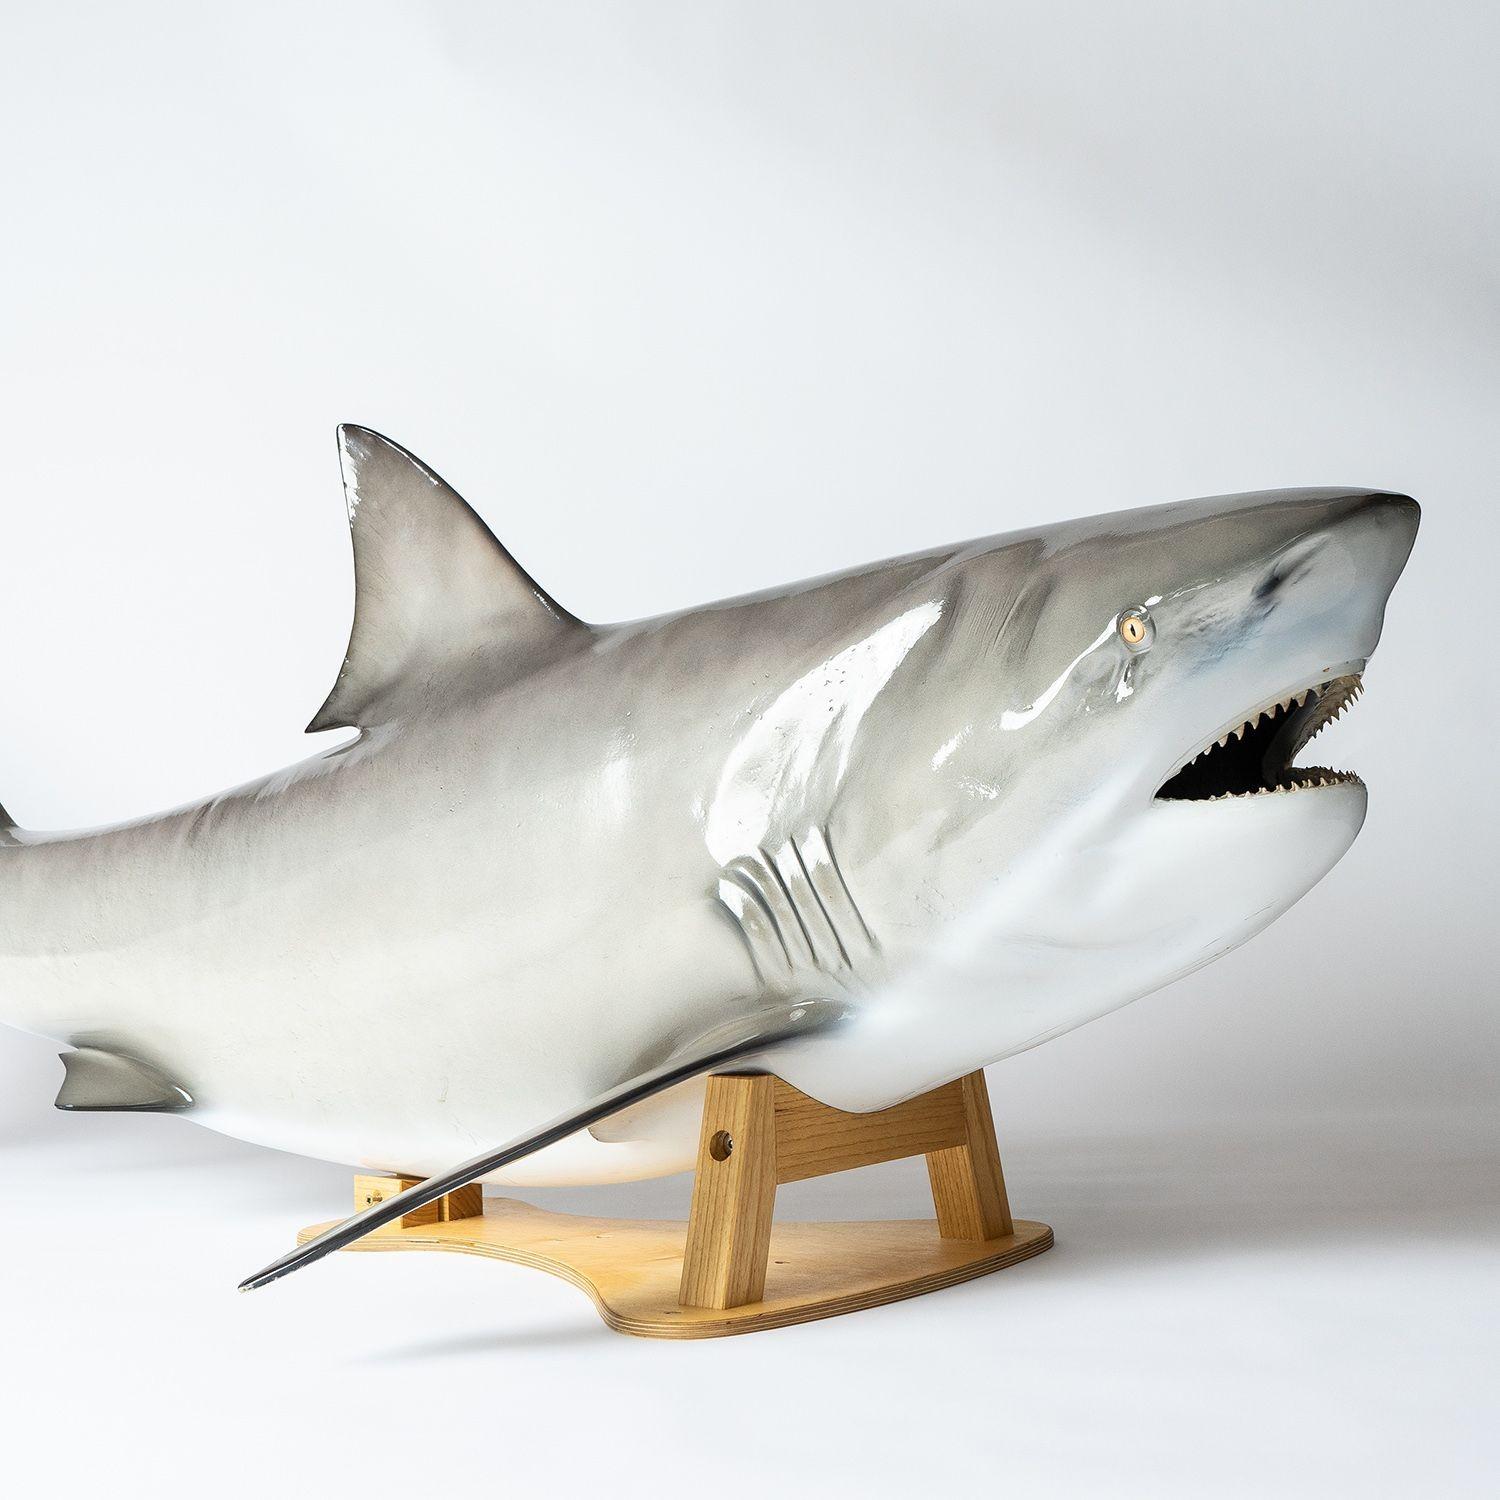 HANDMADE, HANDPAINTED ONE-OFF NATURAL HISTORY DISPLAY
Originally commissioned for the TV show River Monsters with Jeremy Wade.
 
Skilfully made from fibreglass and resin and then hand-painted with a custom and realistic paint job. Supplied with